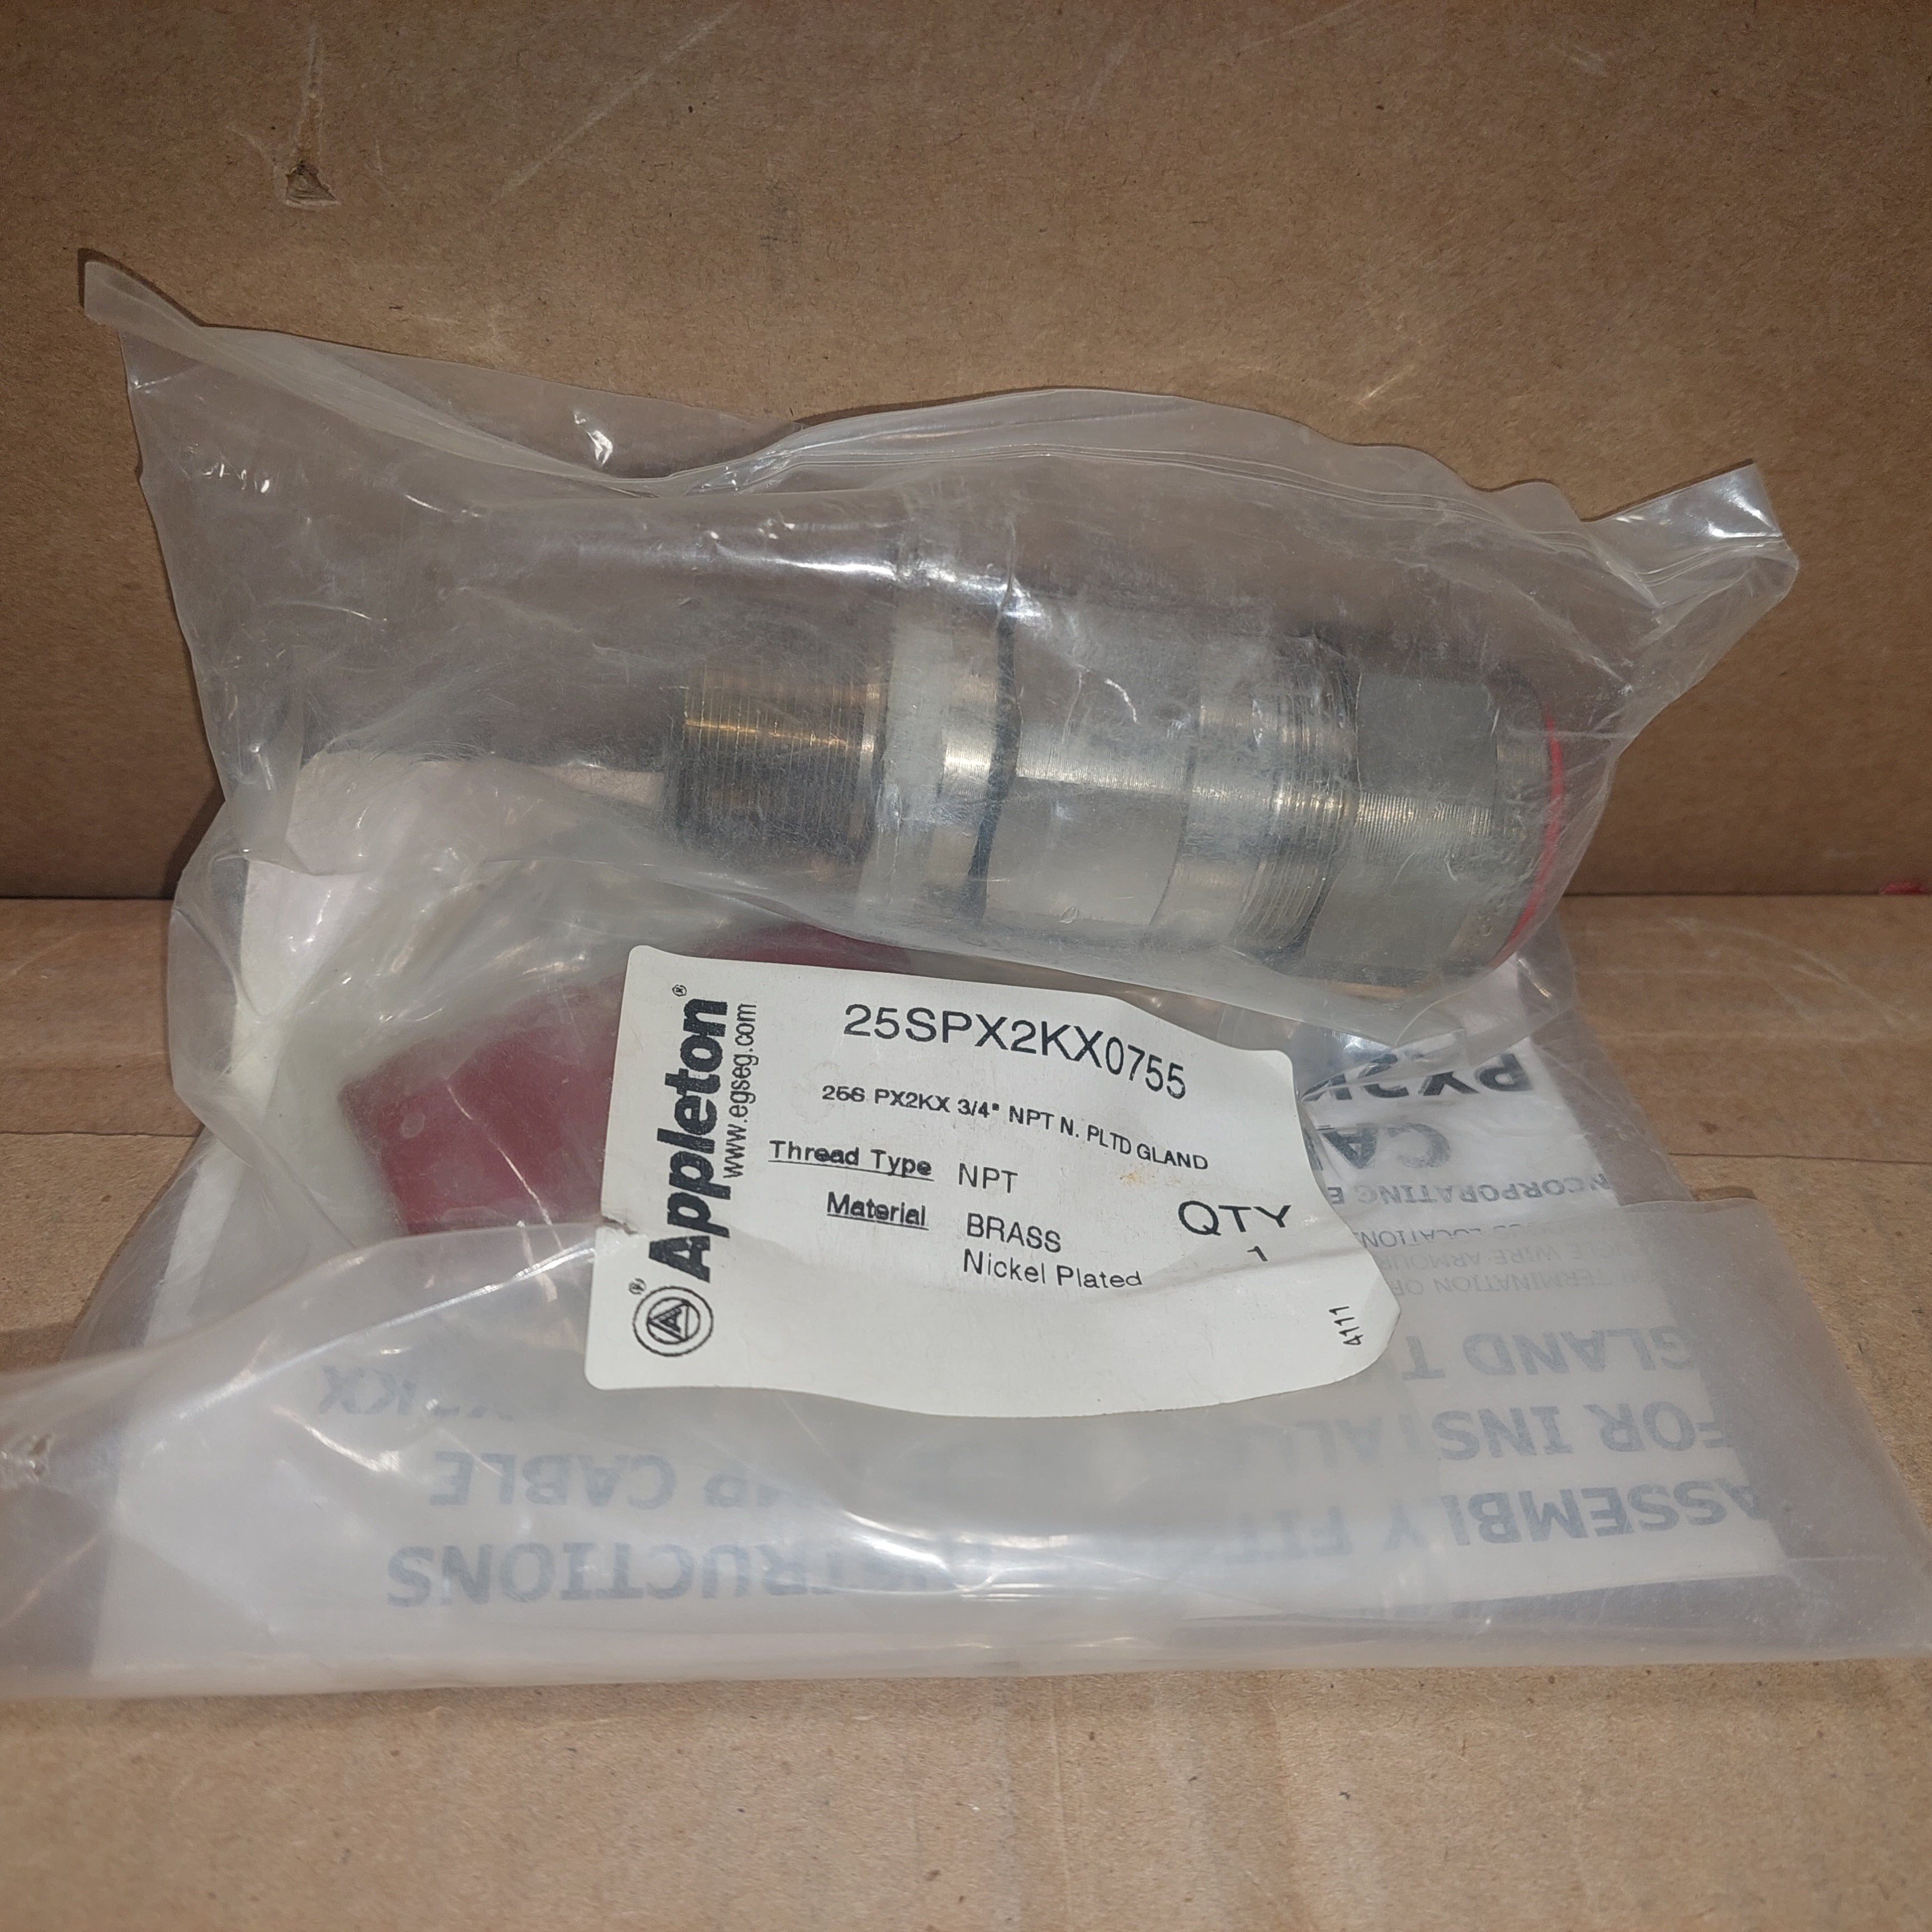 Appleton 25SPX2KX0755 Straight Cable Gland Connector, 3/4" New